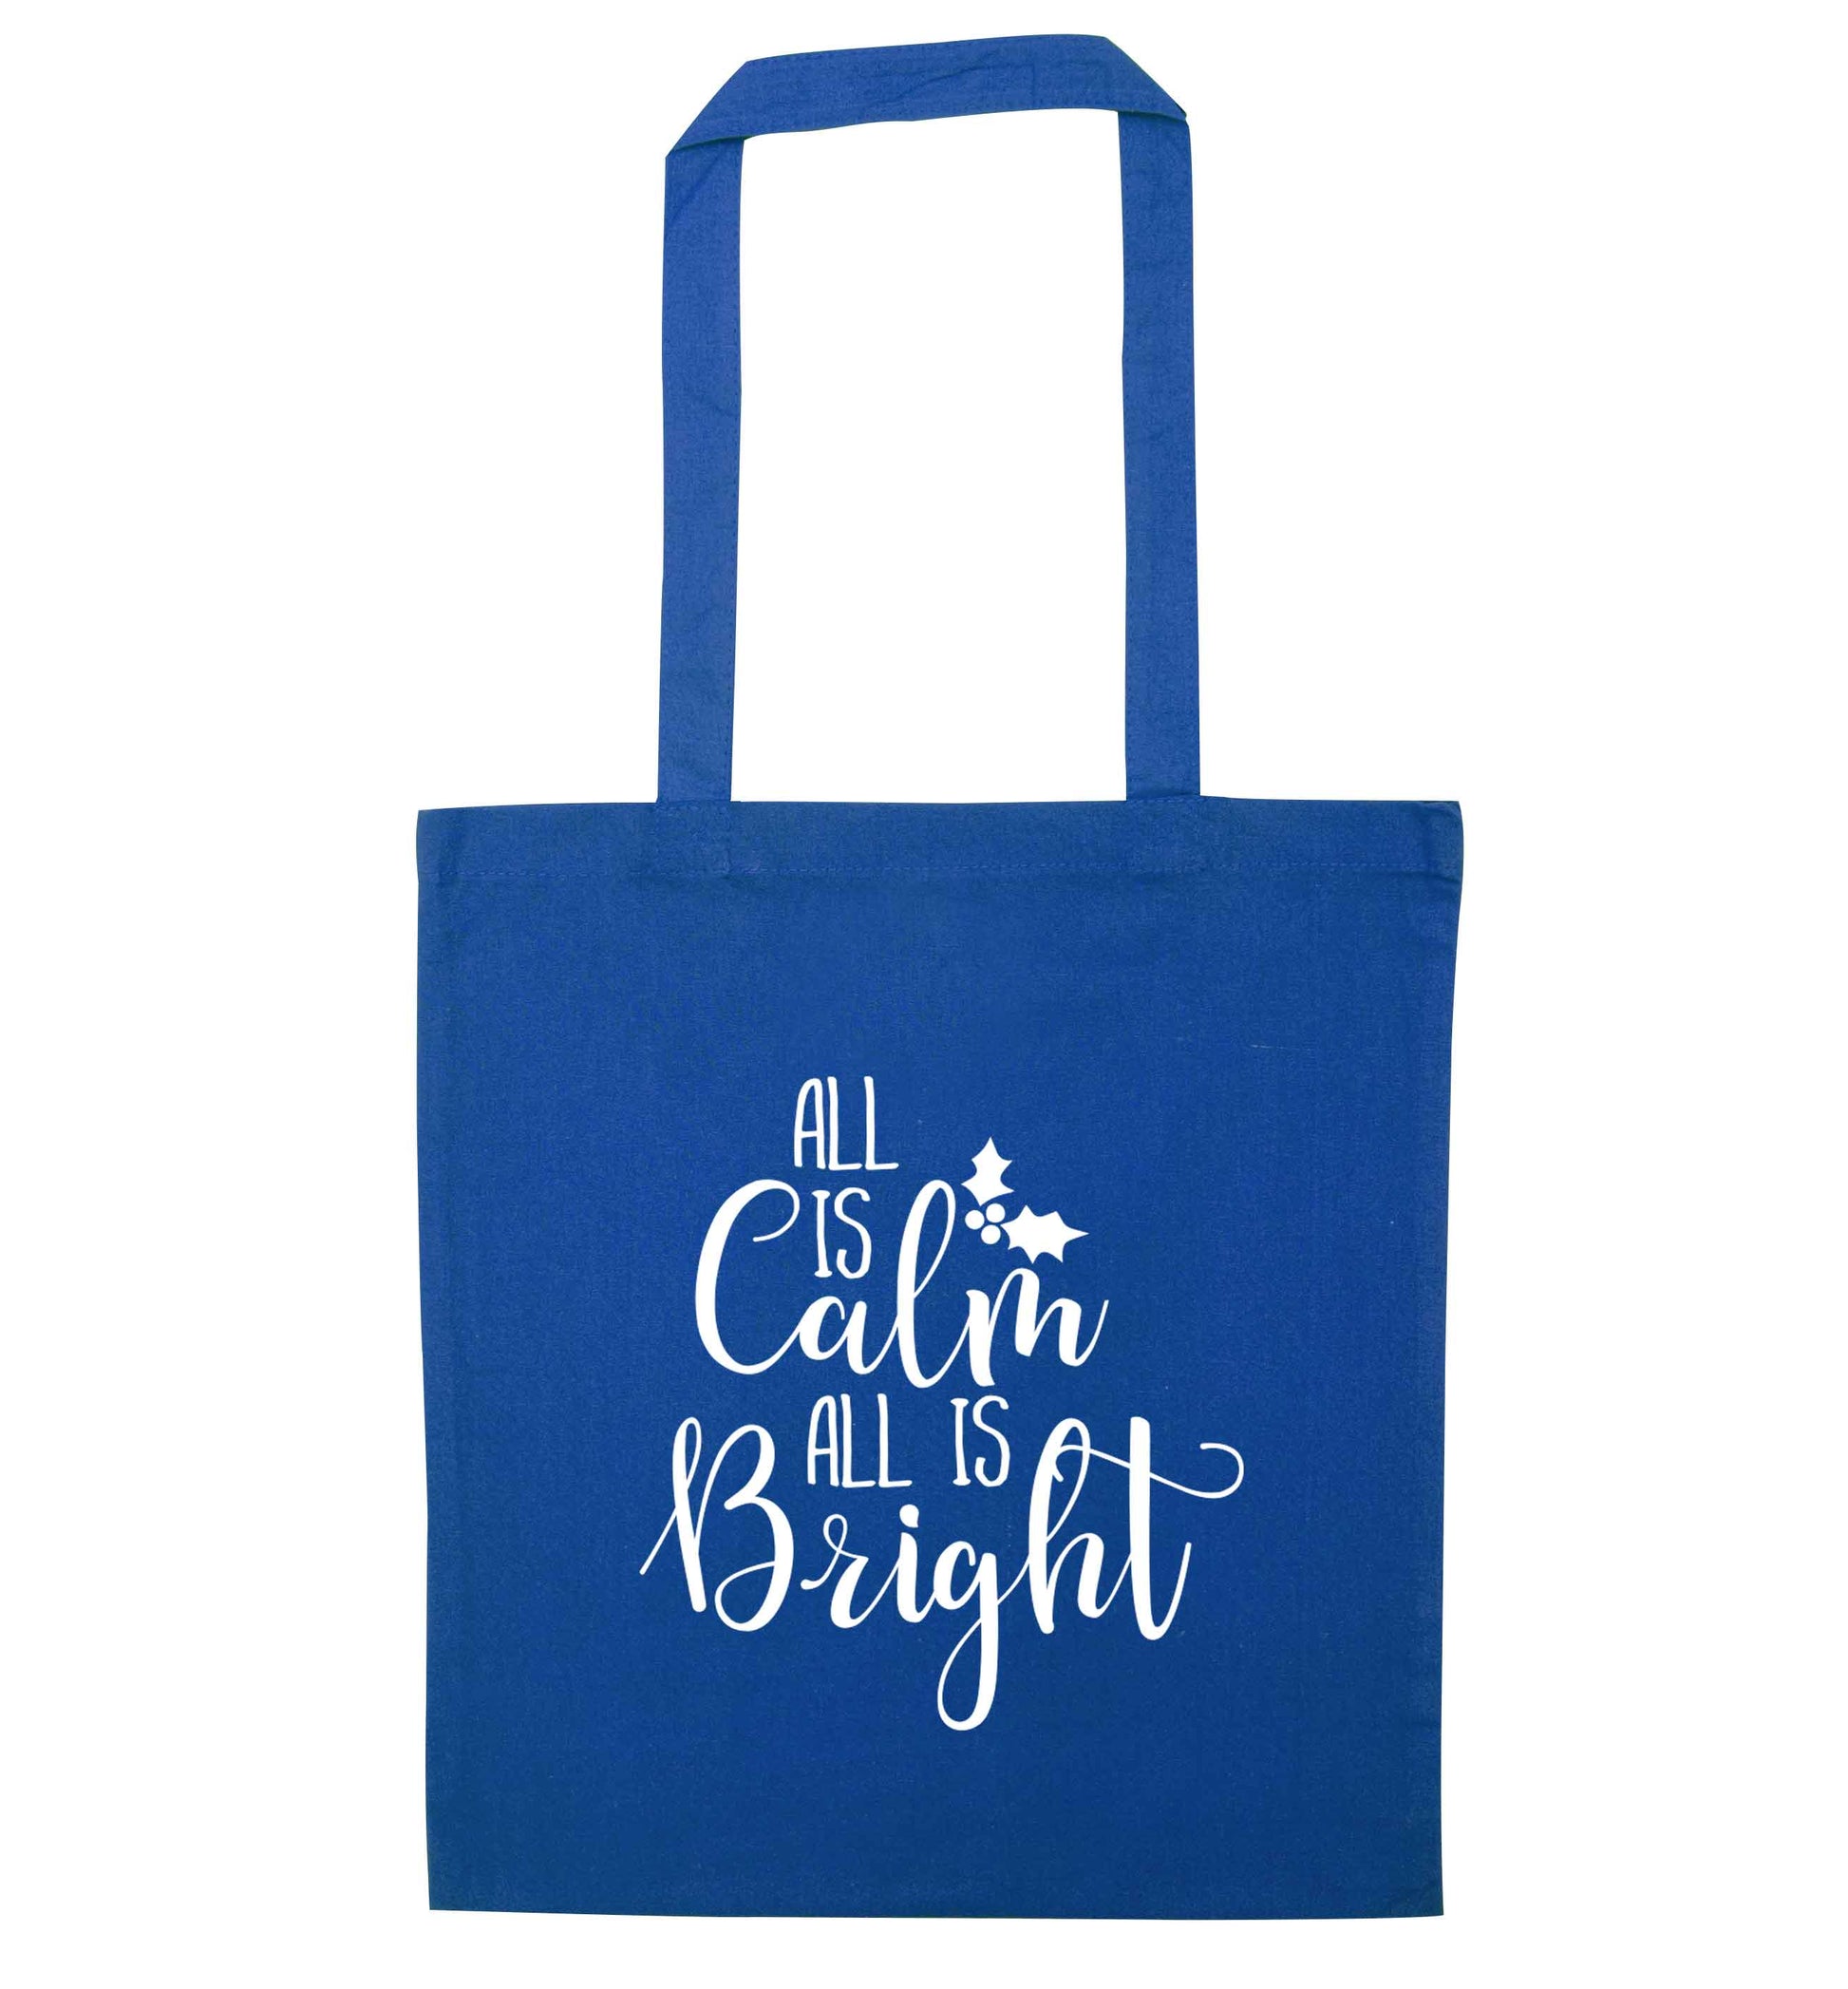 All is calm is bright blue tote bag